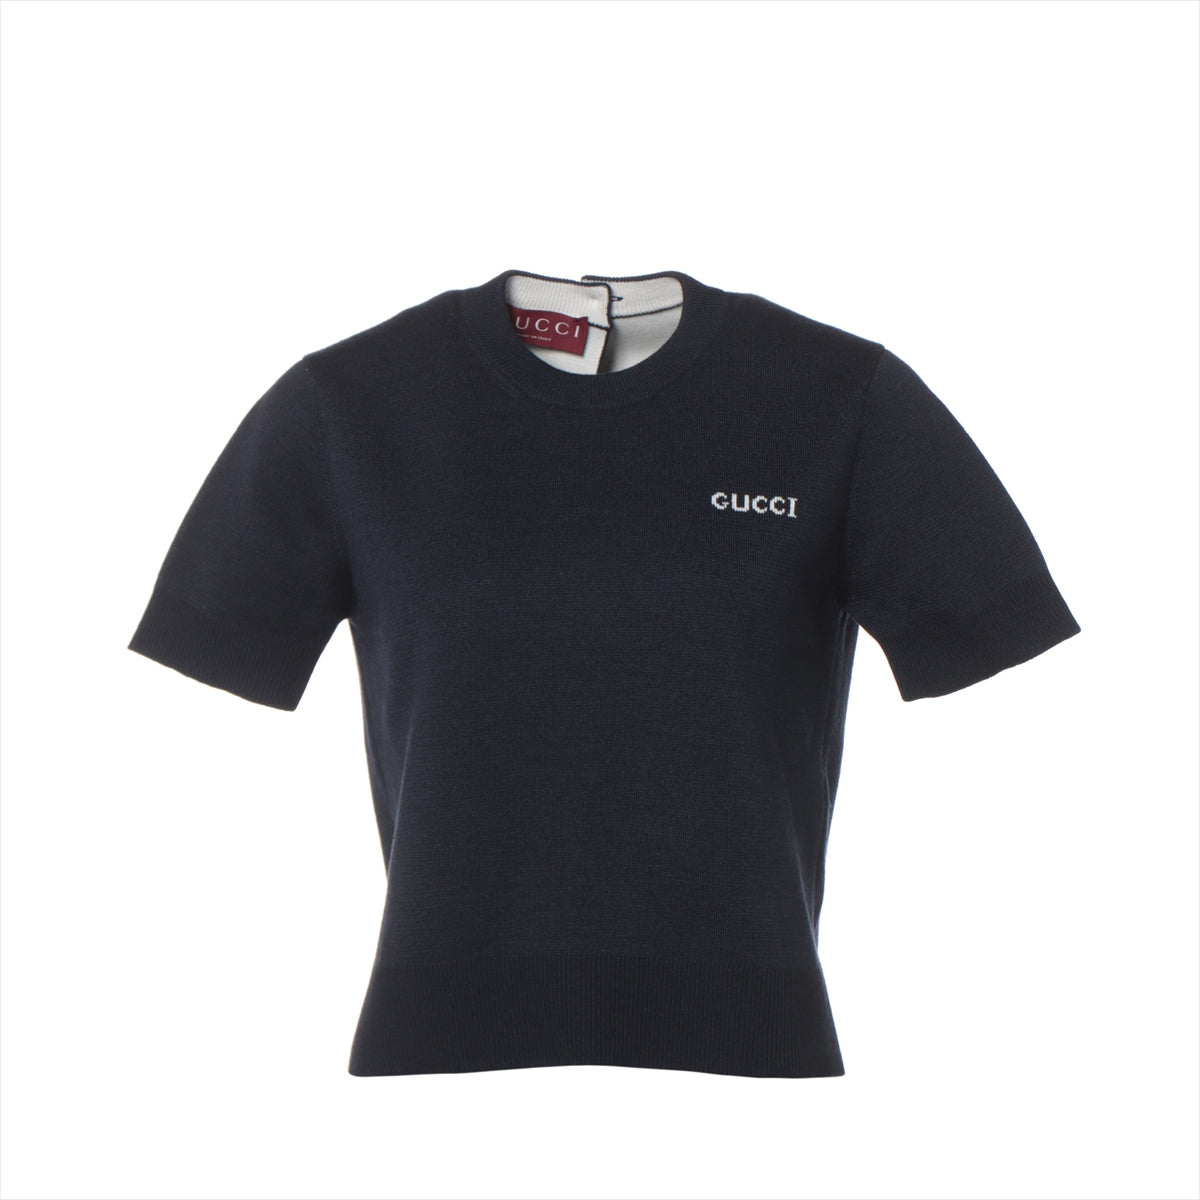 Gucci 24SS Cotton & Wool Short Sleeve Knitwear XS Ladies' Navy Blue  Gucci intarsia wool top buttons closures 792130